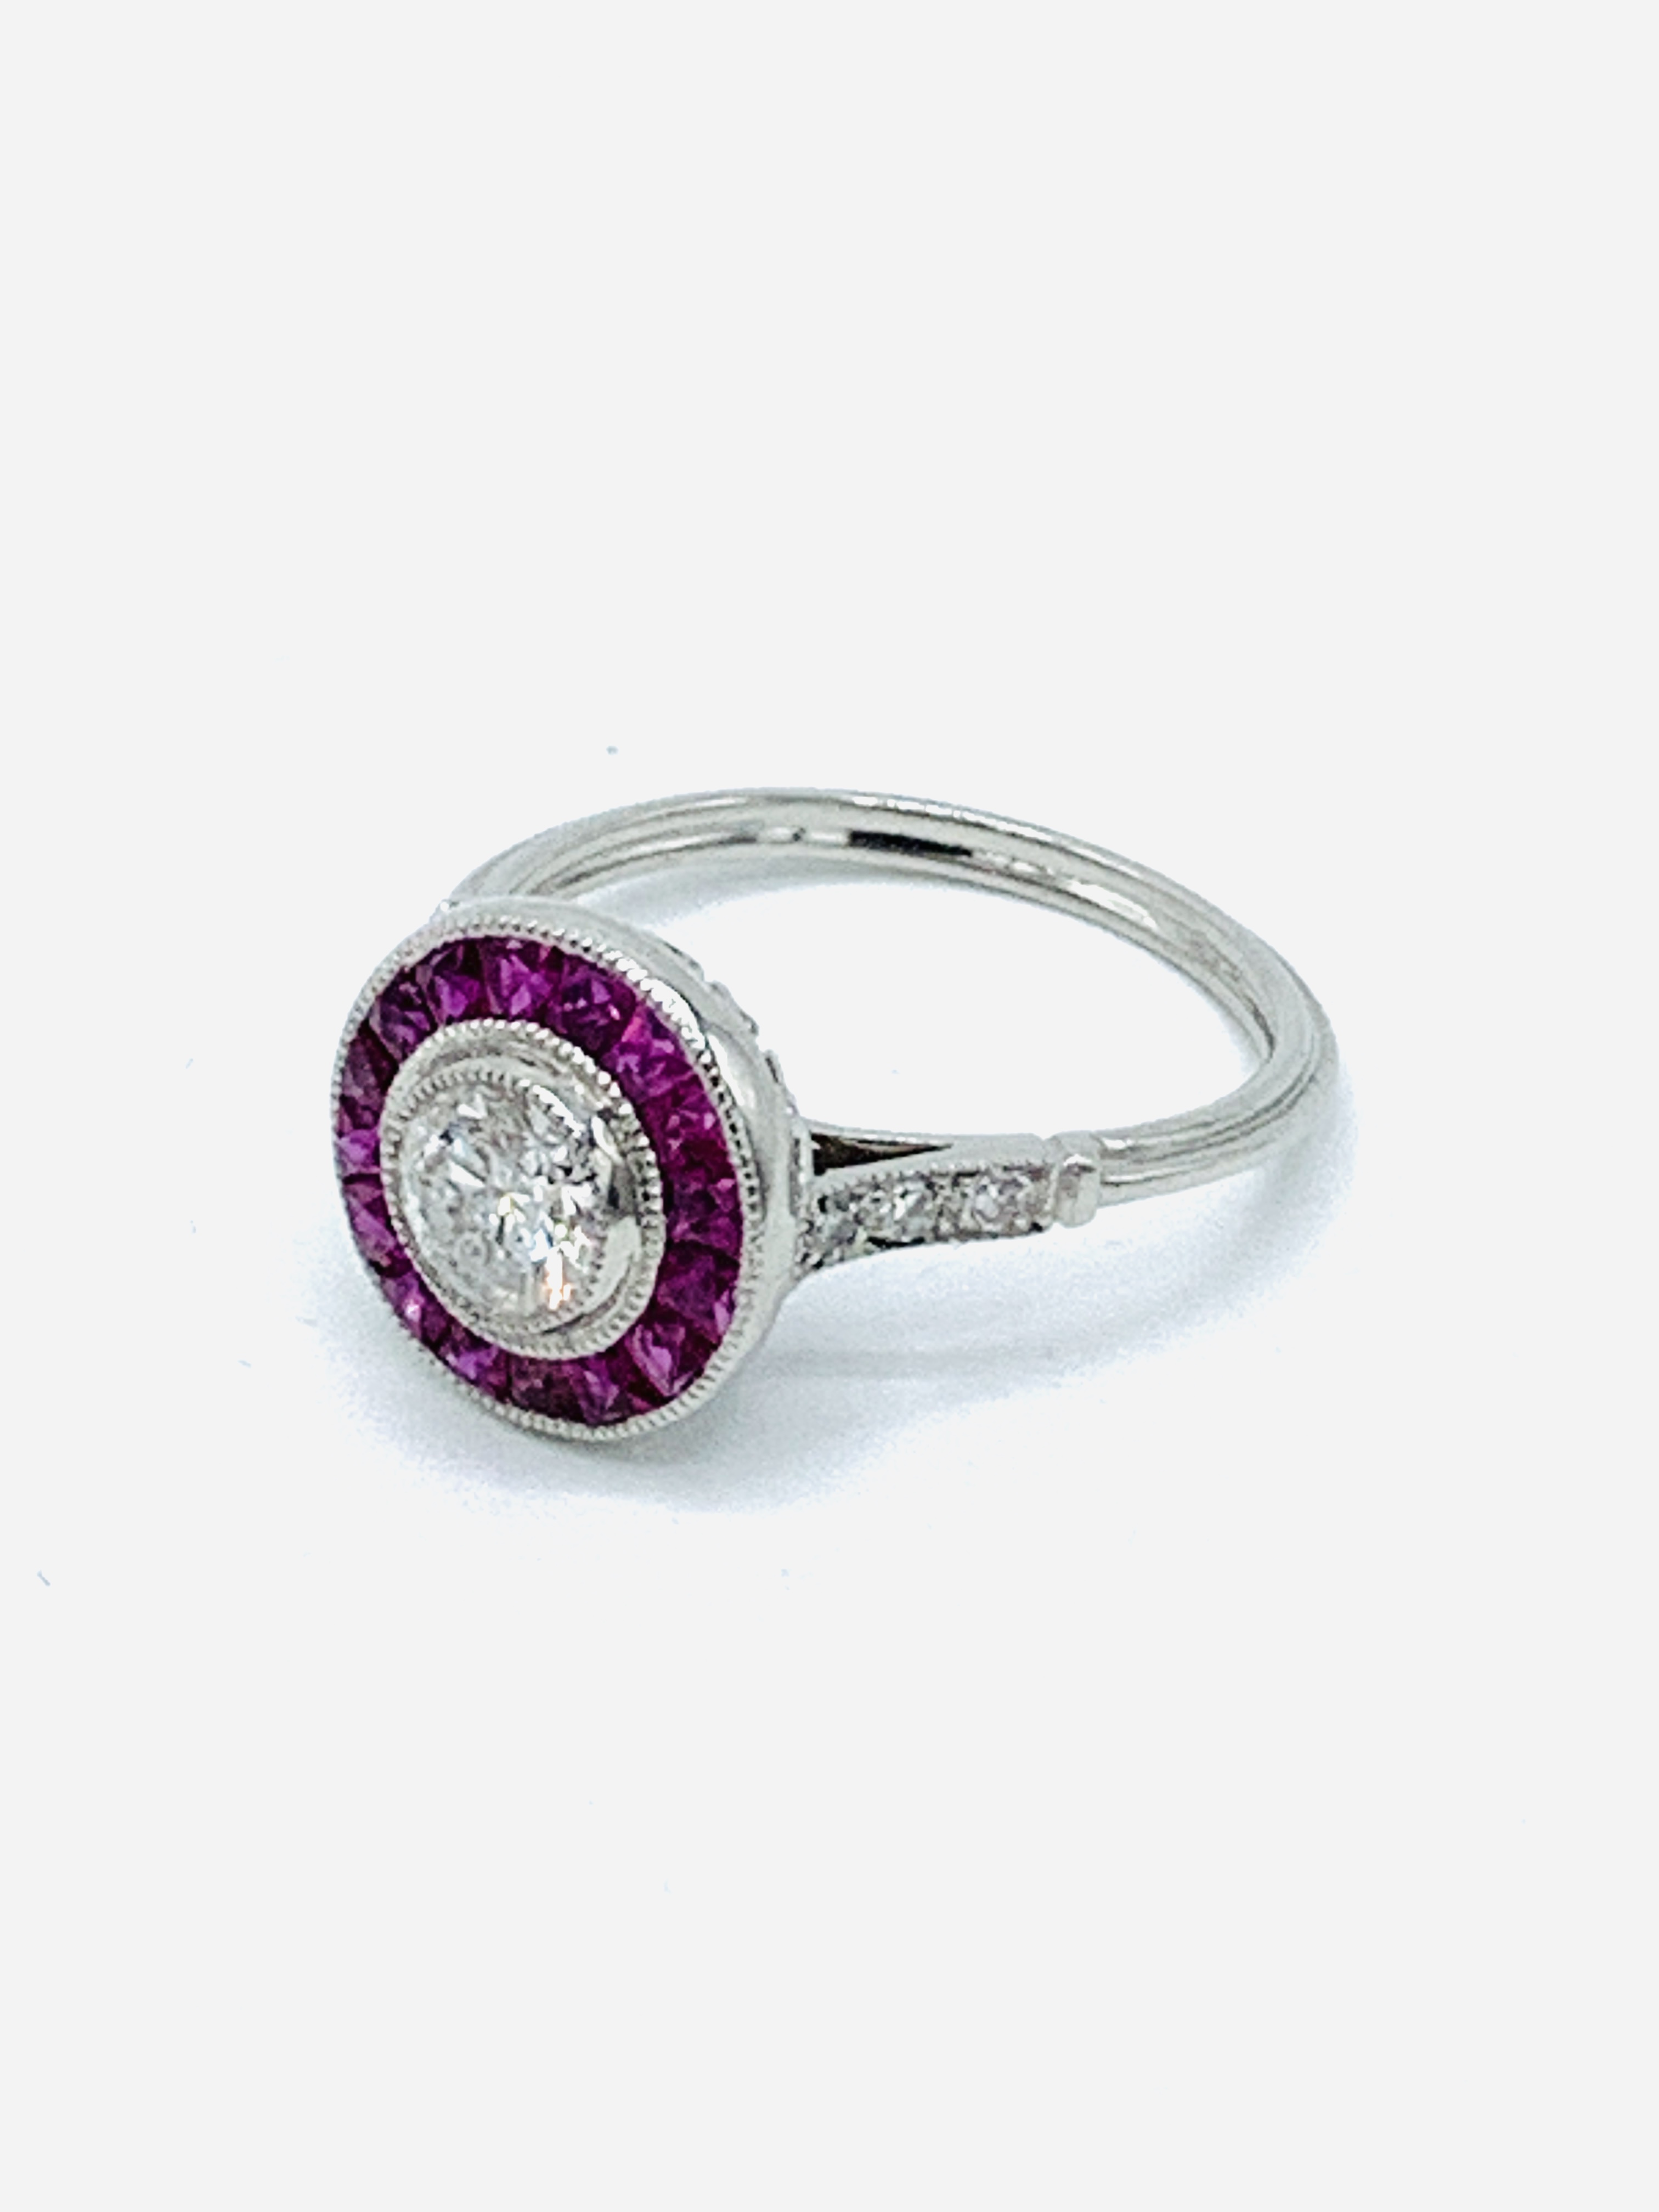 White gold and ruby target ring. - Image 3 of 4